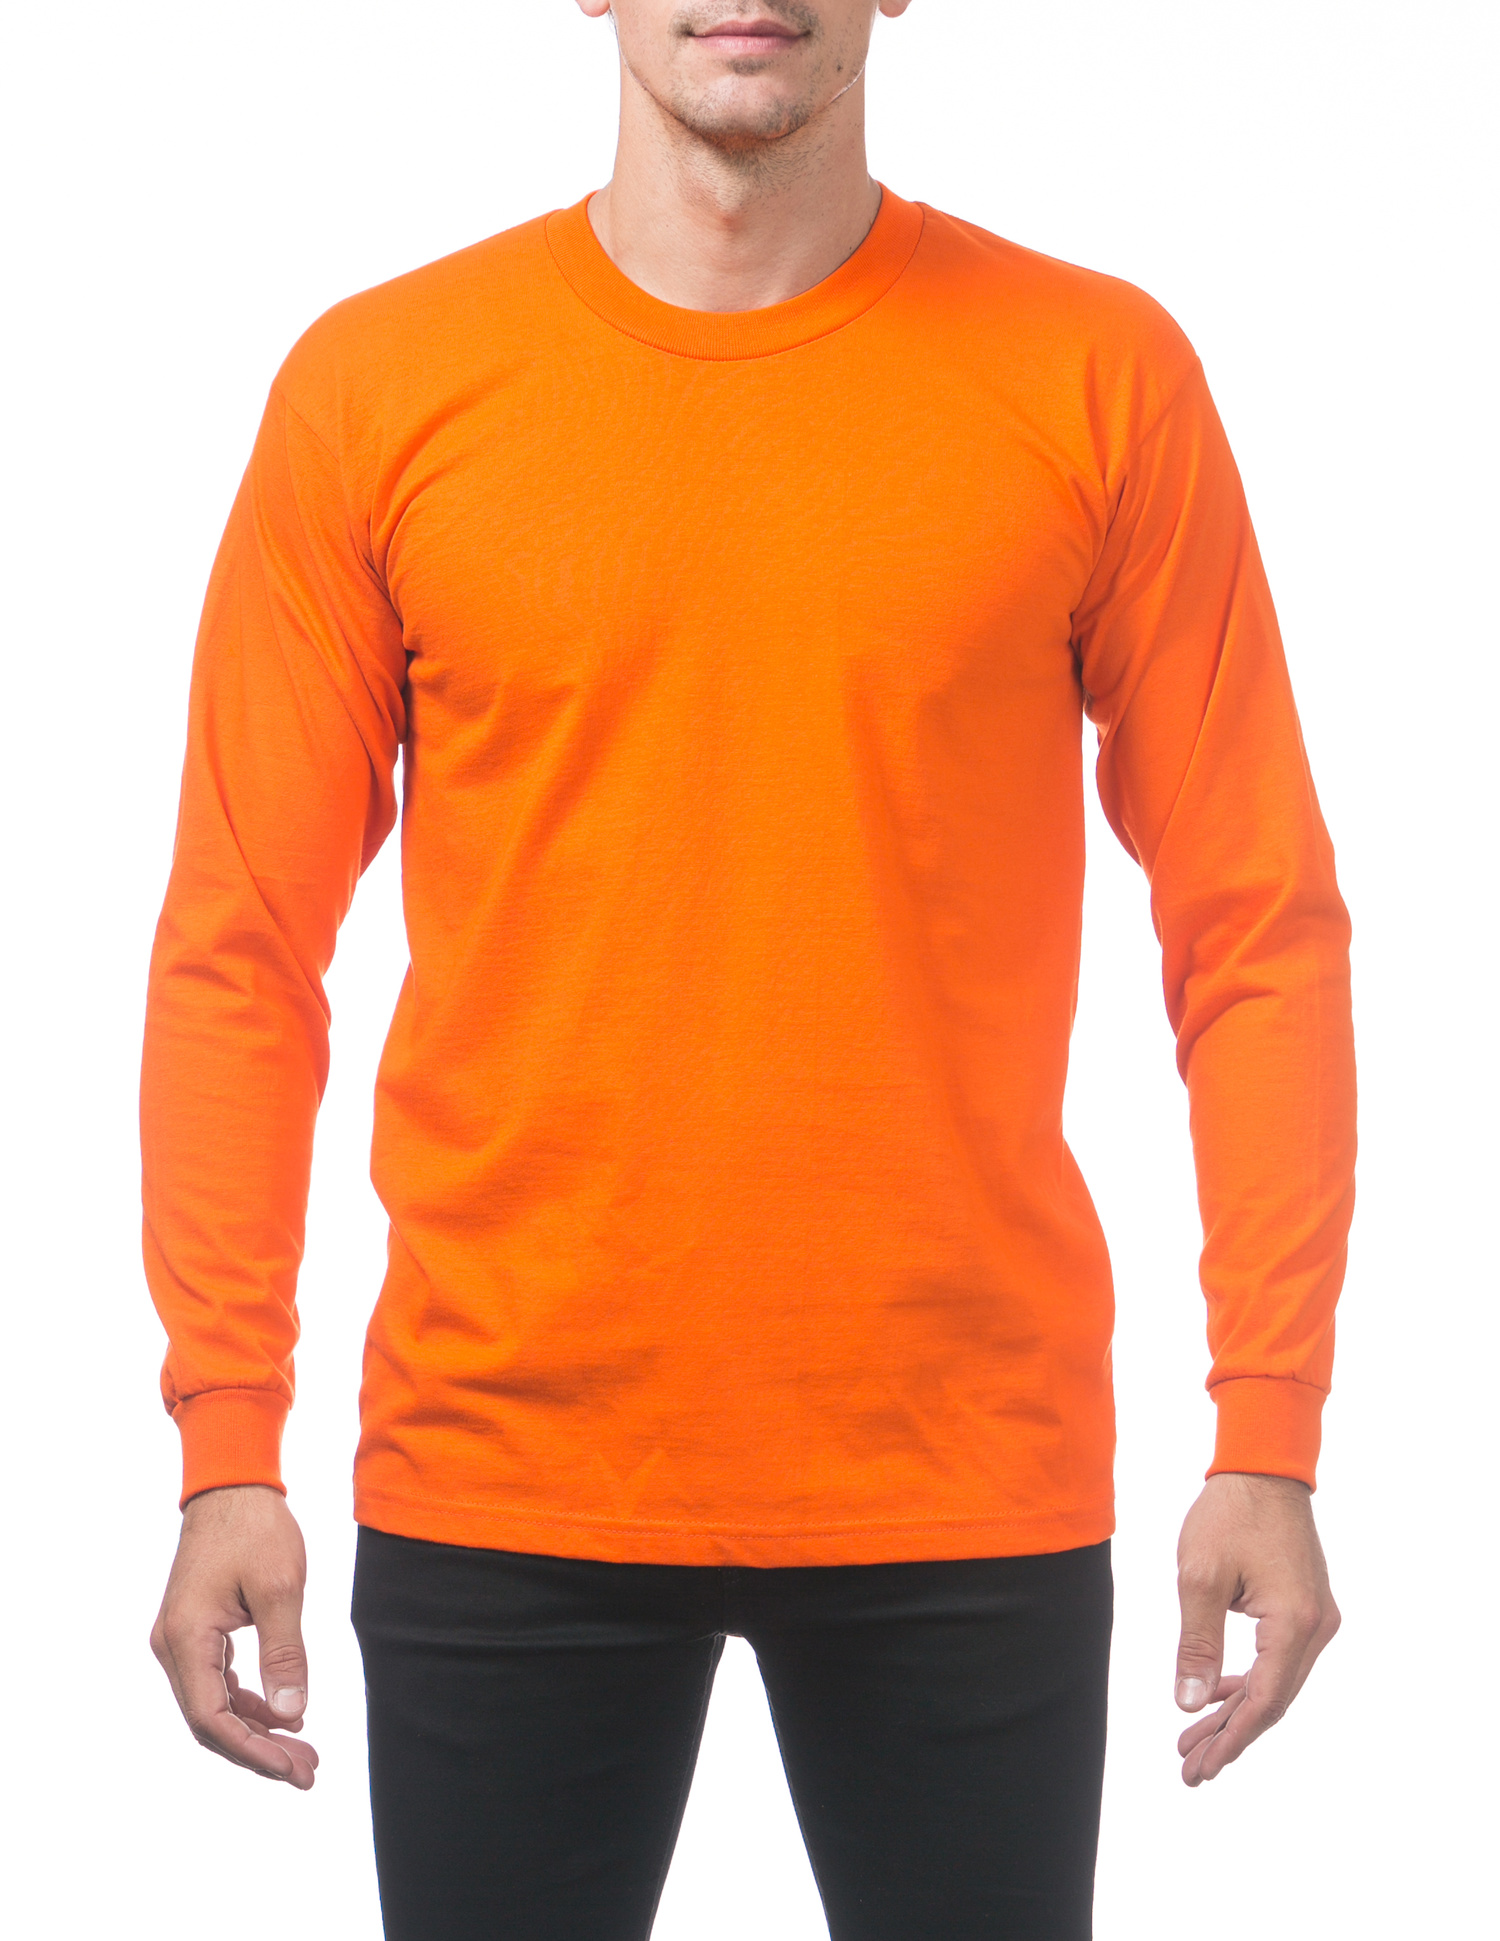 Unisex garment-dyed heavyweight t-shirt — Pohl for Clerk in Chesterfield